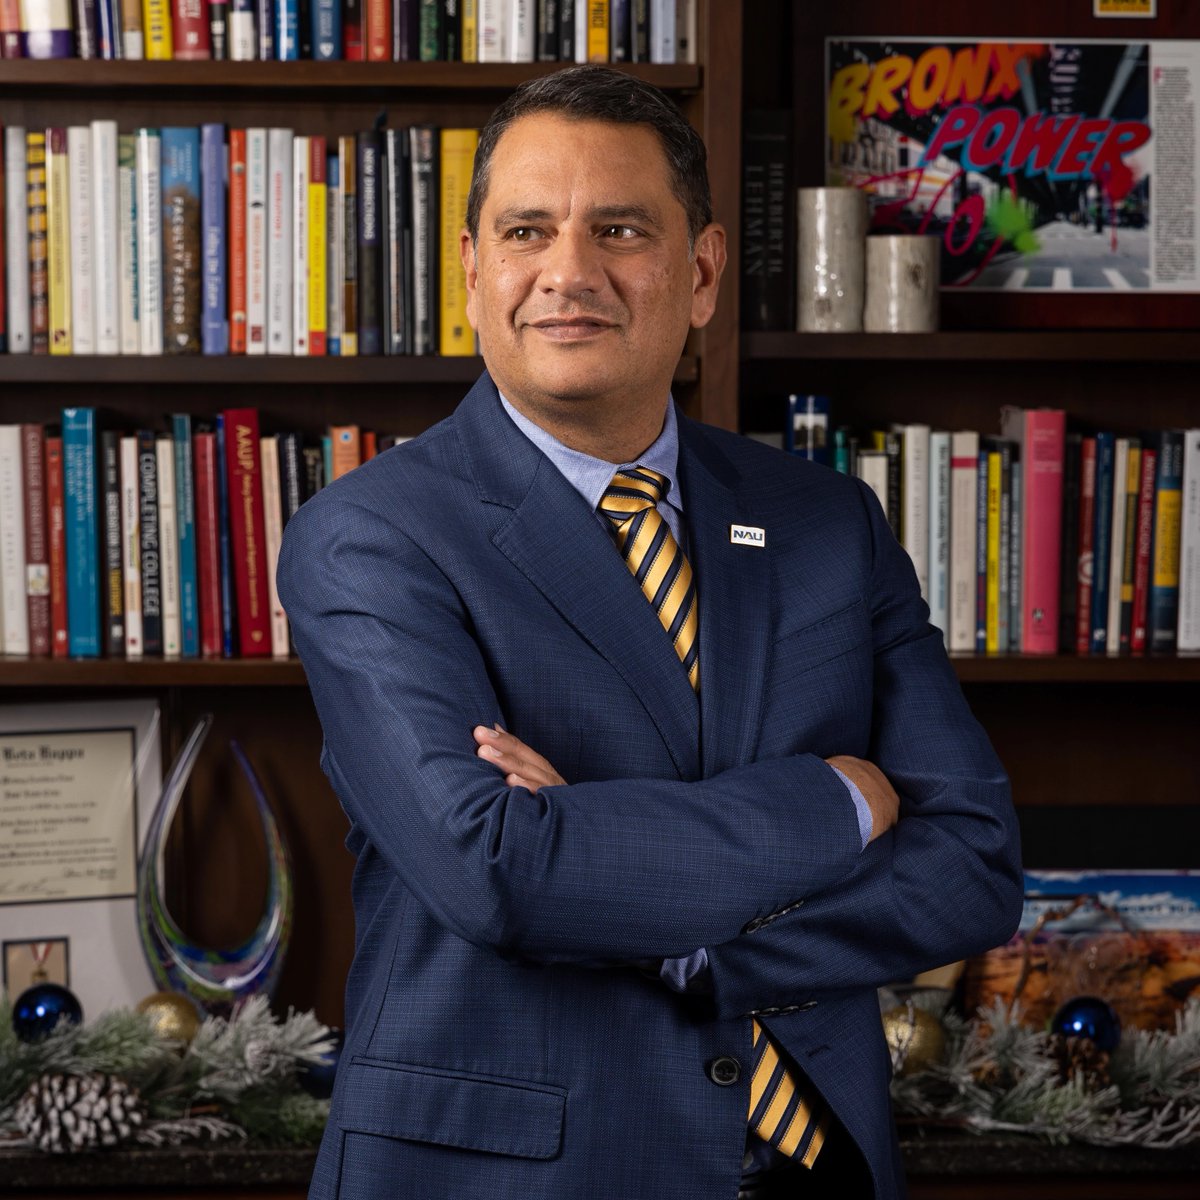 Congratulations to @NAU President Cruz Rivera on his election to the American Academy of Arts & Sciences! As a member, he will help set the direction of research in science and technology policy, global security, social policy, education and the arts. More:…